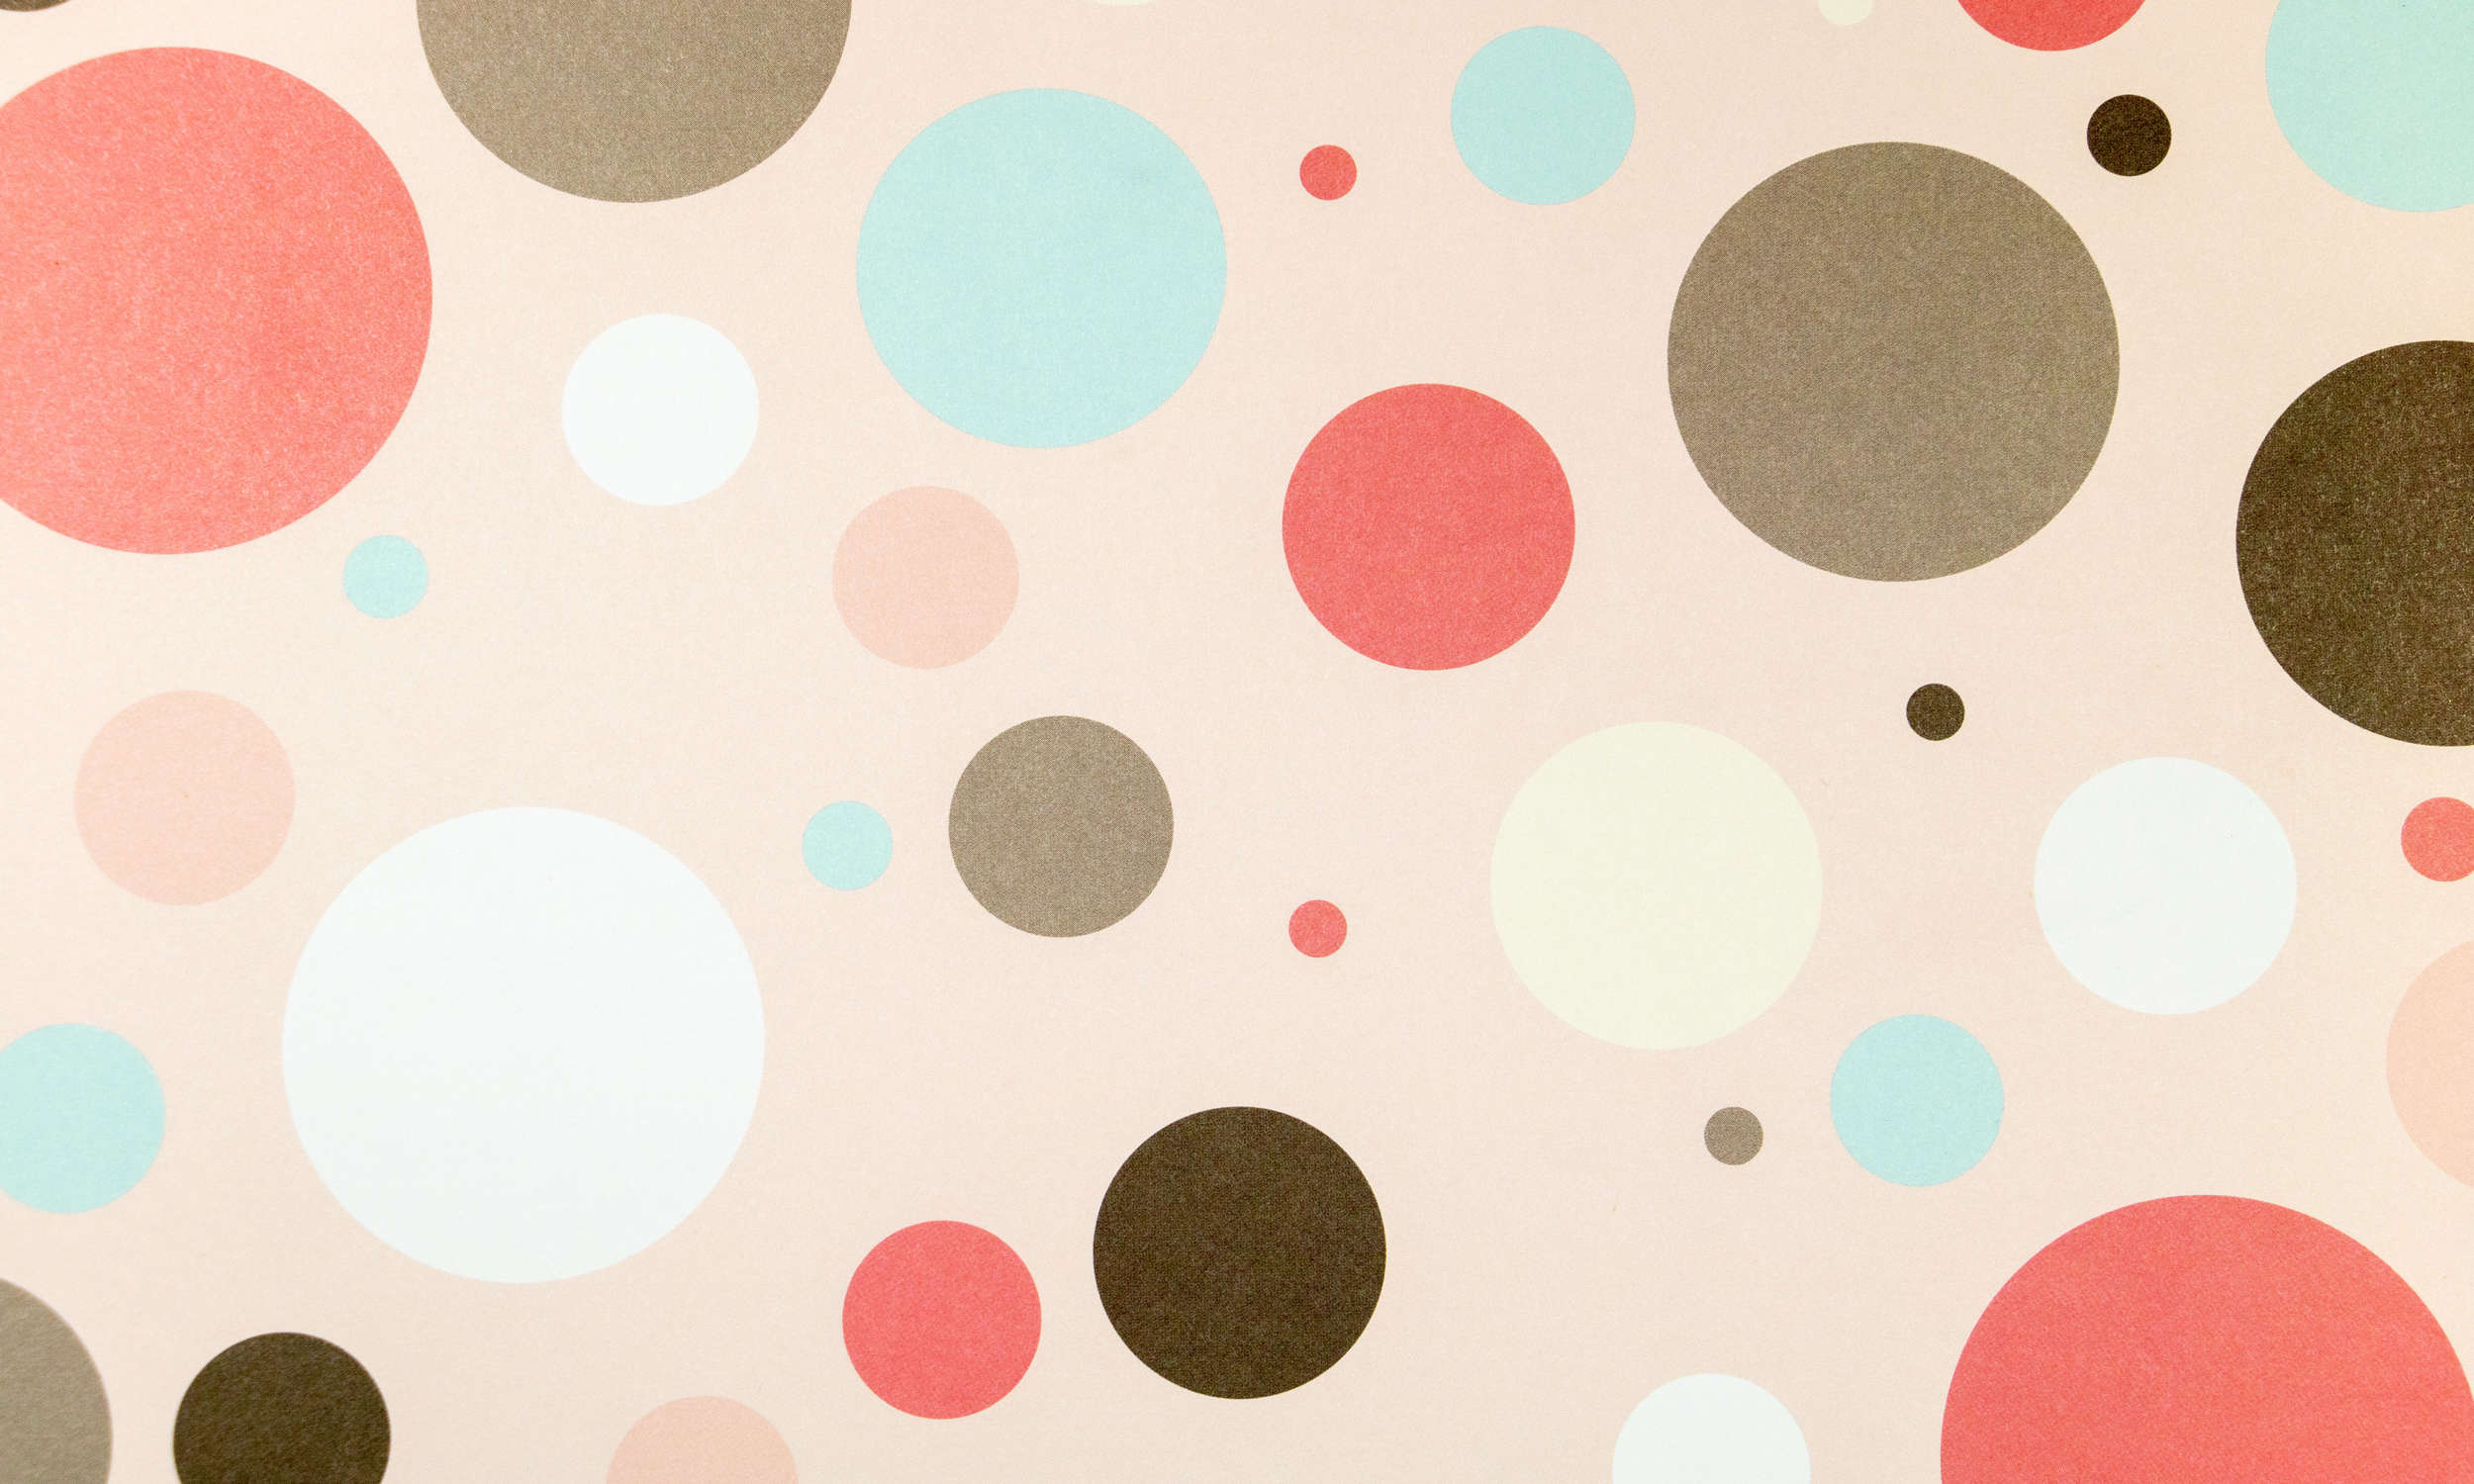             Nursery mural with colourful circles - Smooth & slightly shiny non-woven
        